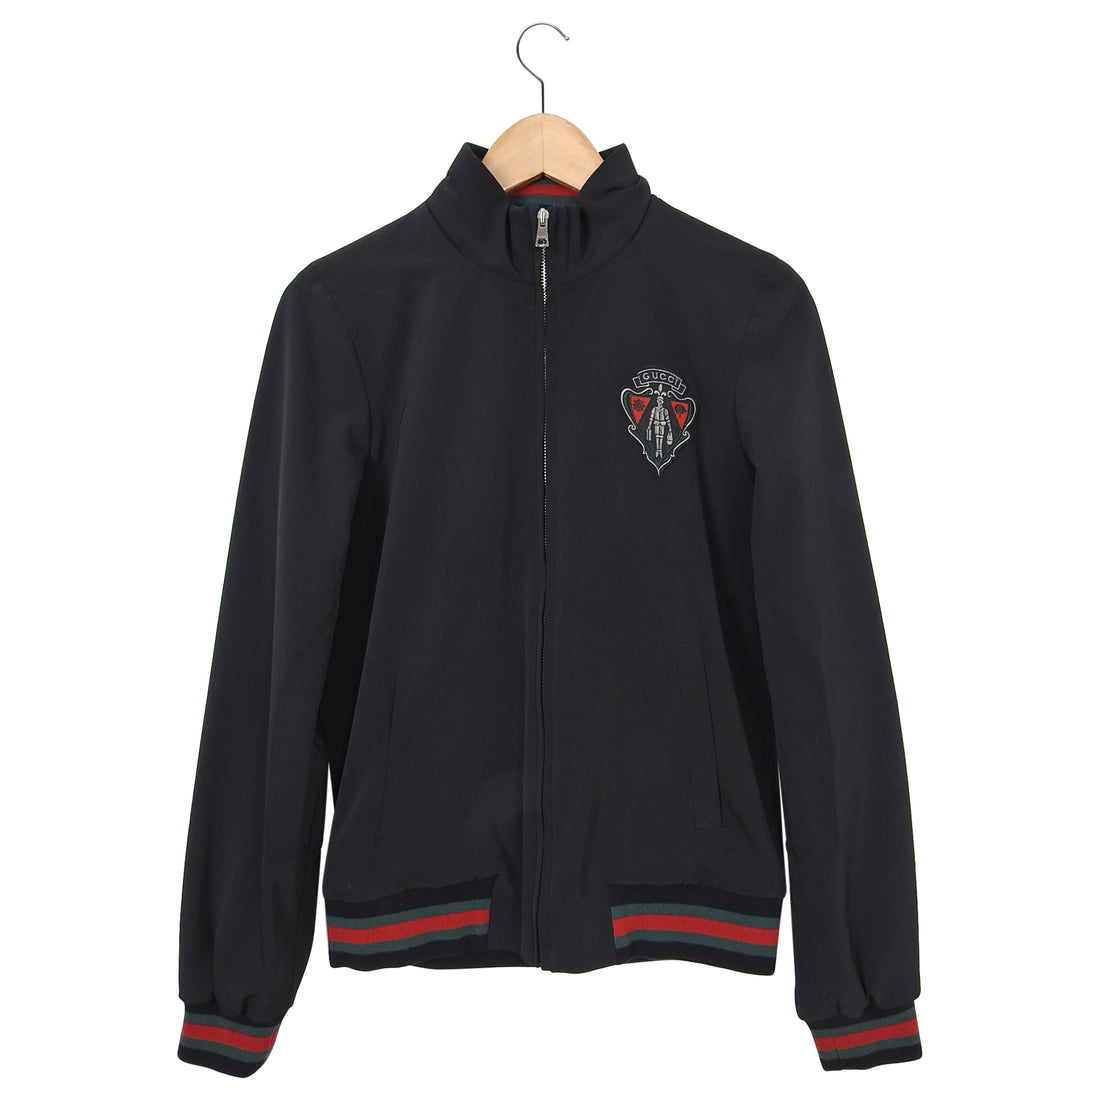 Gucci Equestrian Black Hooded Jacket with Crest Detail - S